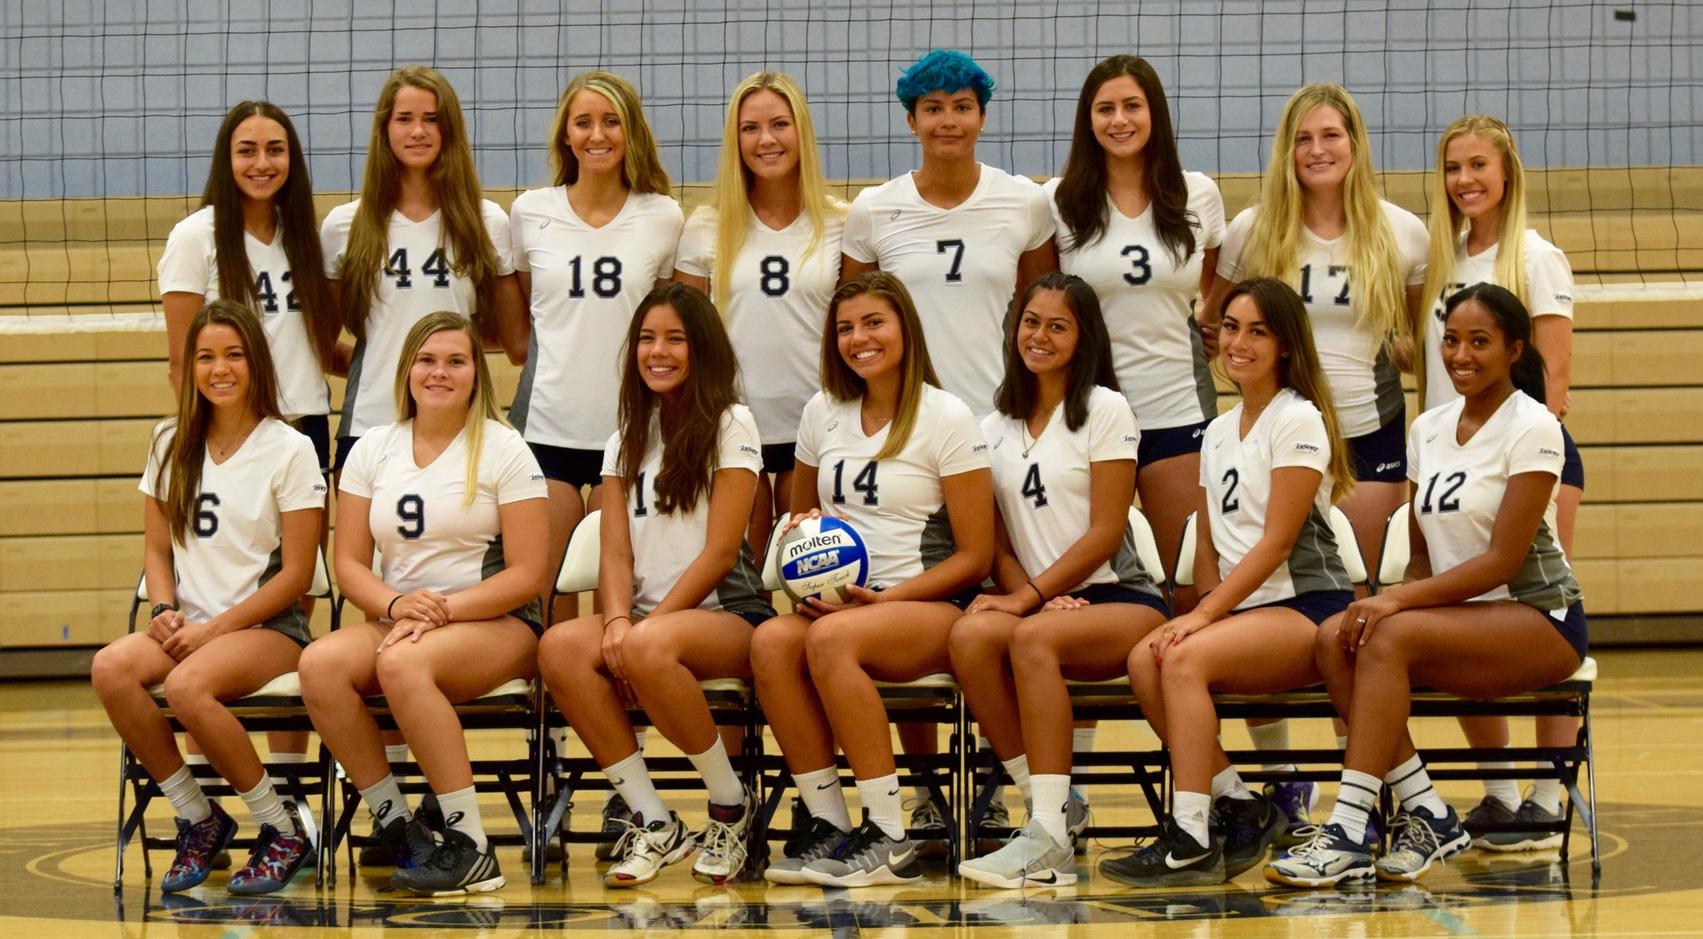 Women's volleyball team goes up against Saddleback tonight